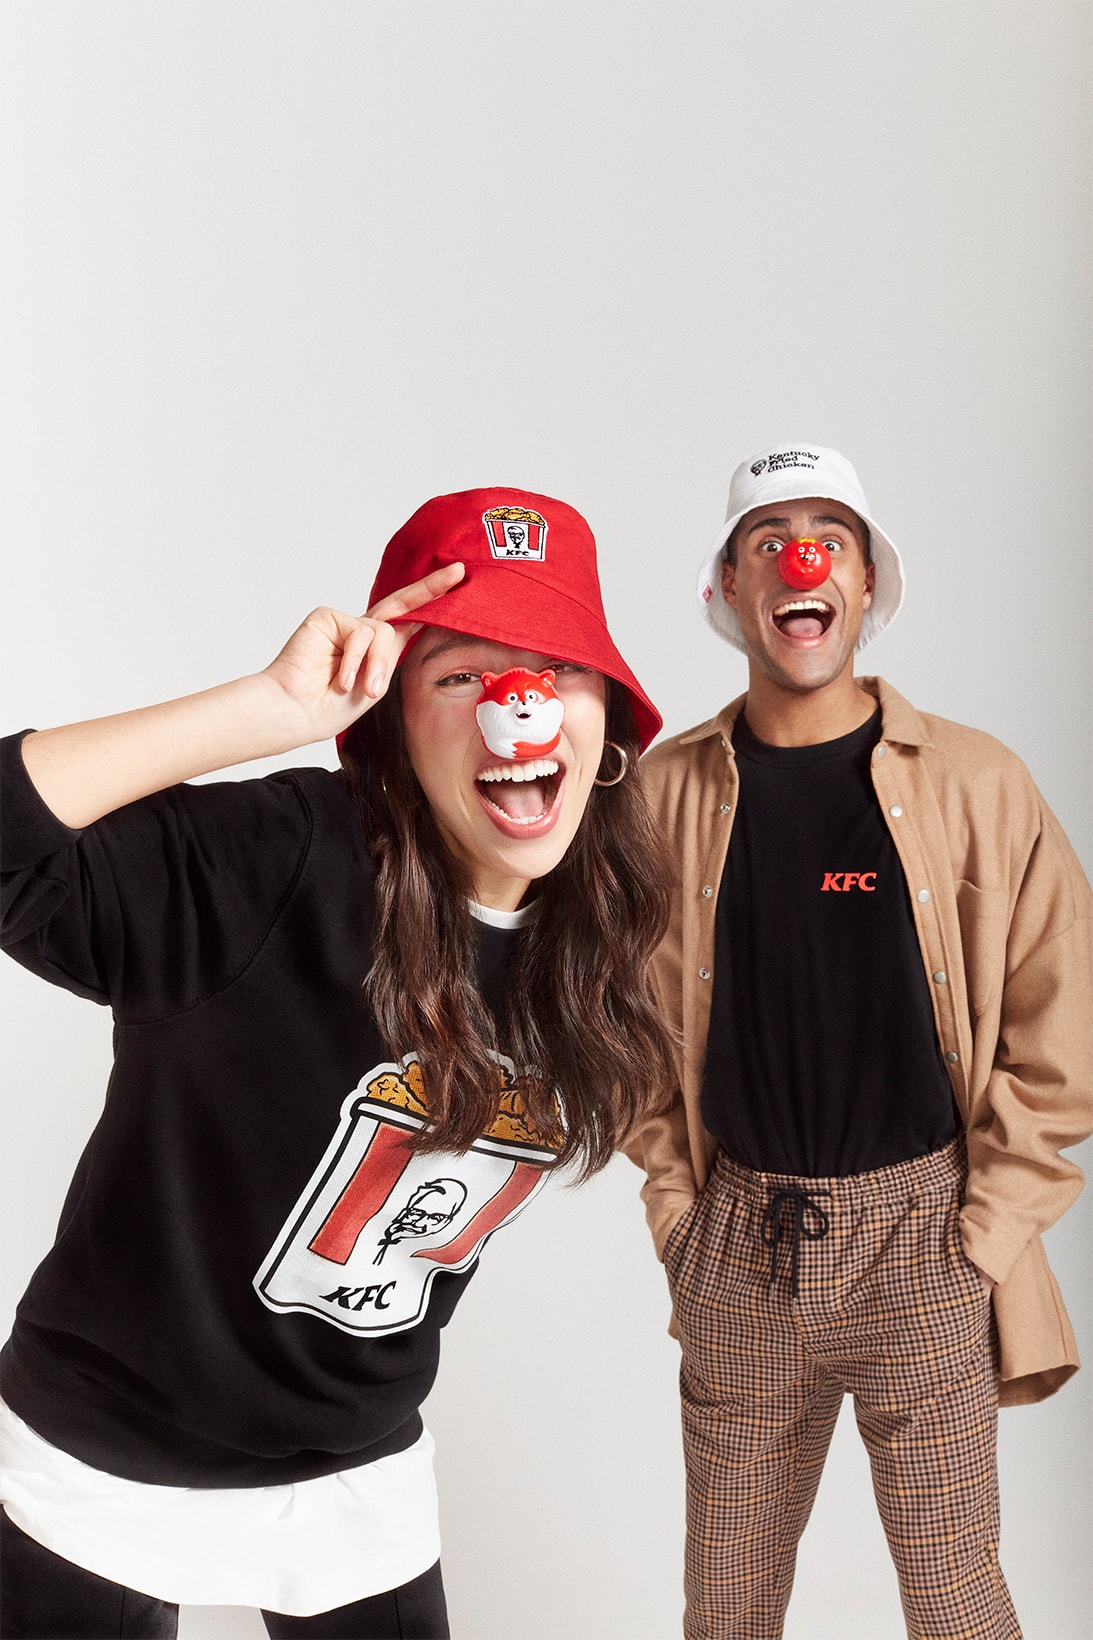 kfc bucket hat kentucky fried chicken foundation comic relief red nose day charity donation uk united kingdom ireland red white long sleeve shirt